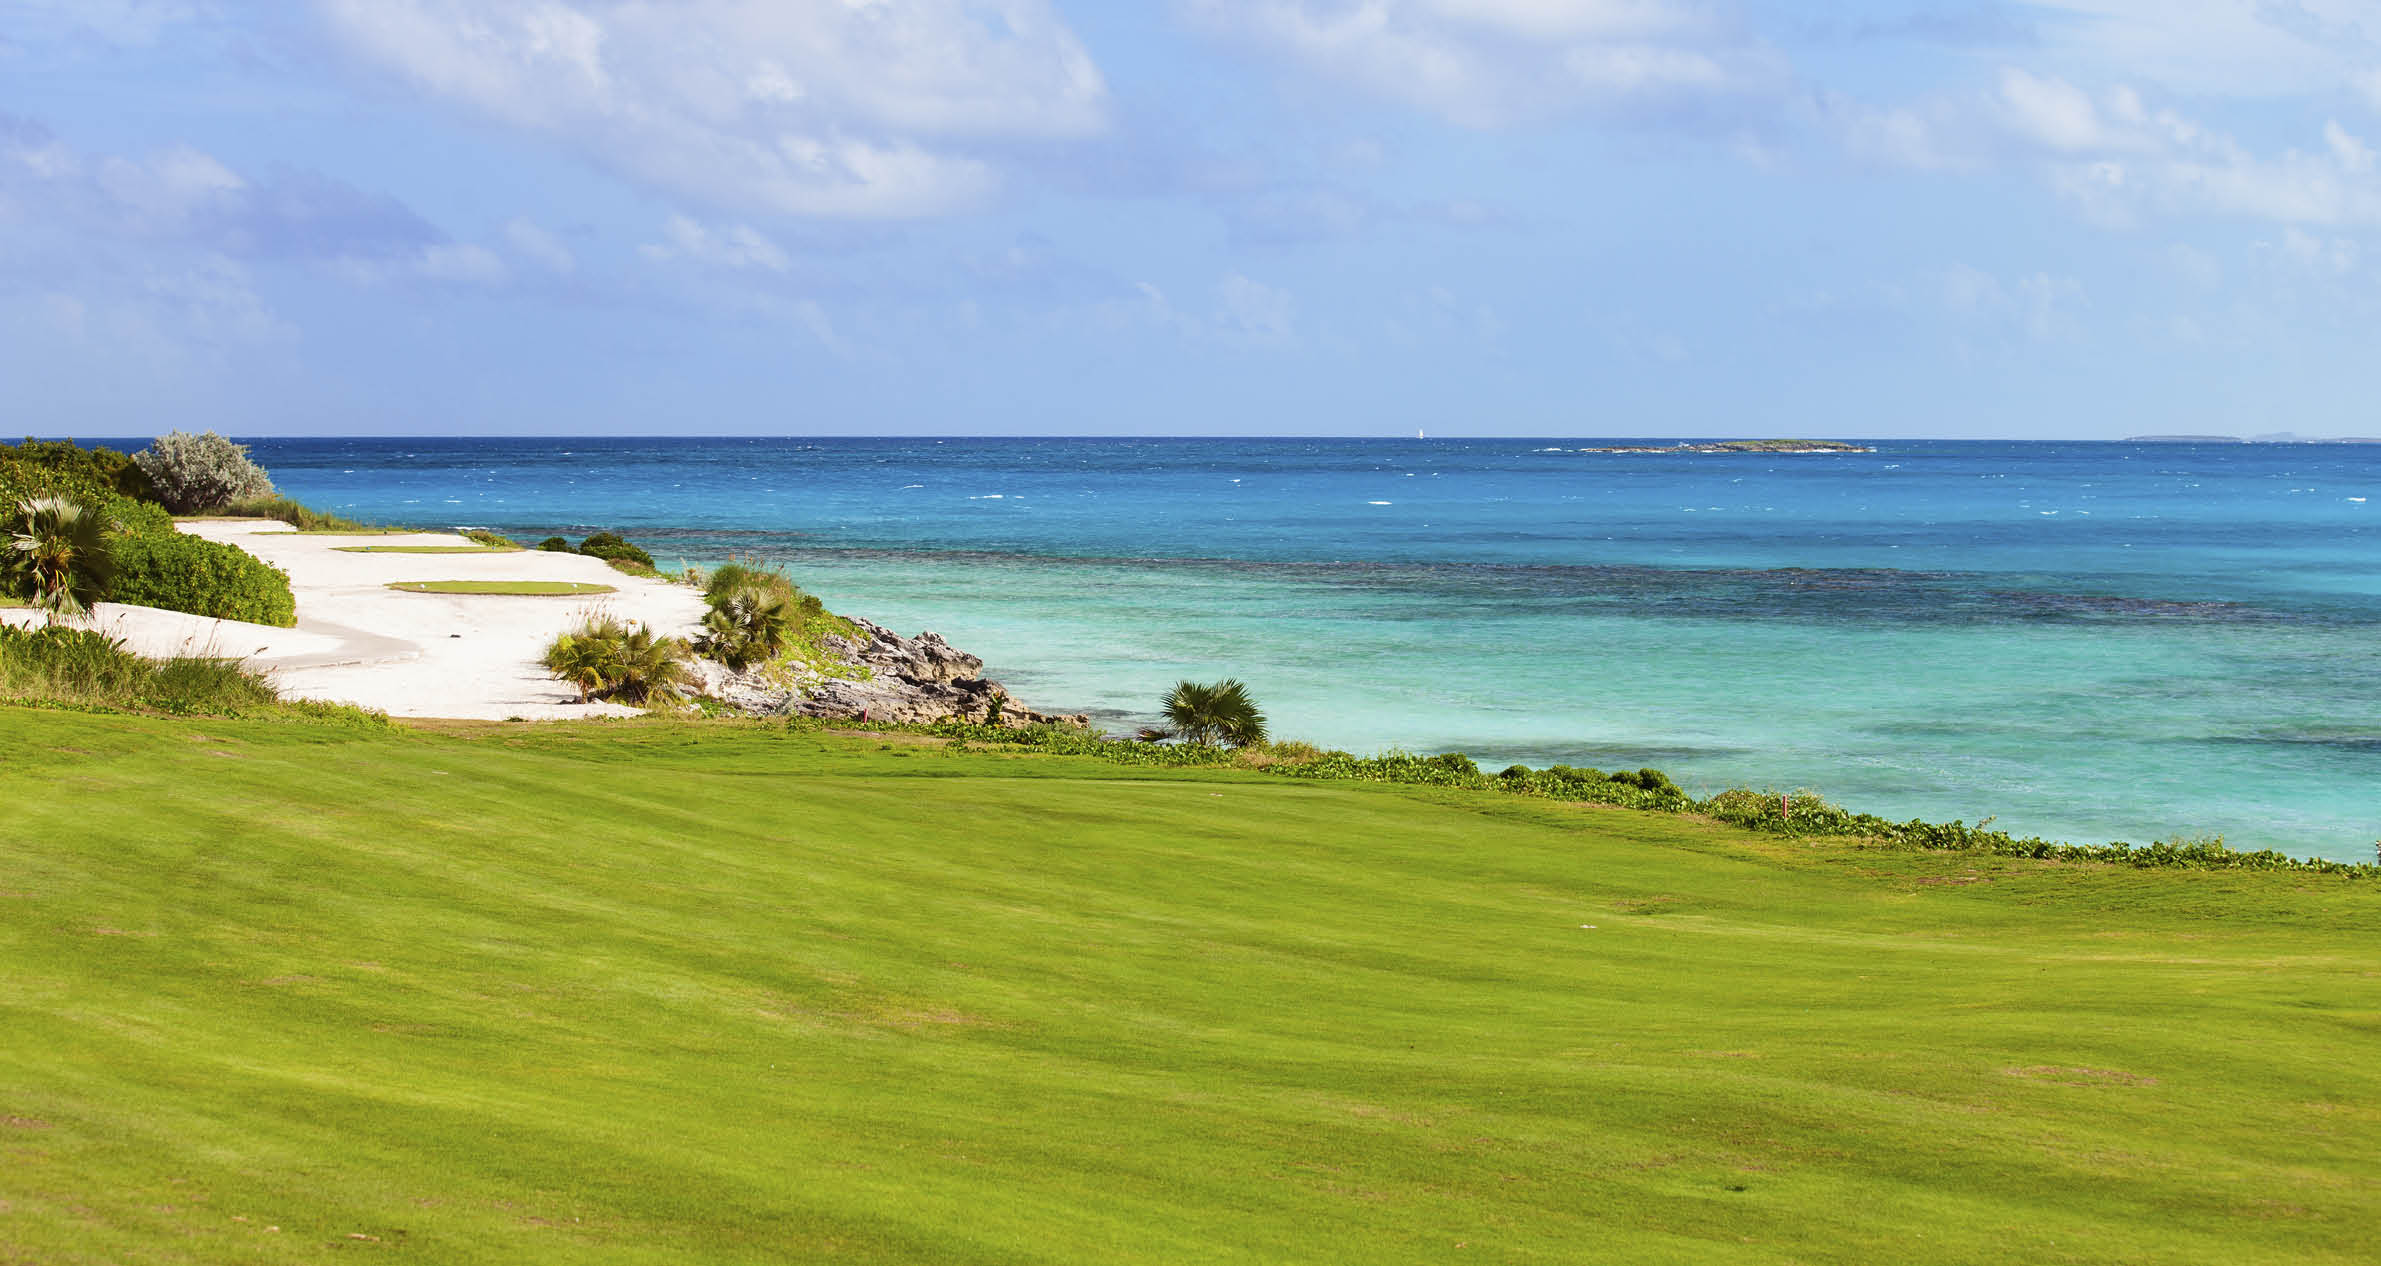 Stunning view of a coastal golf course